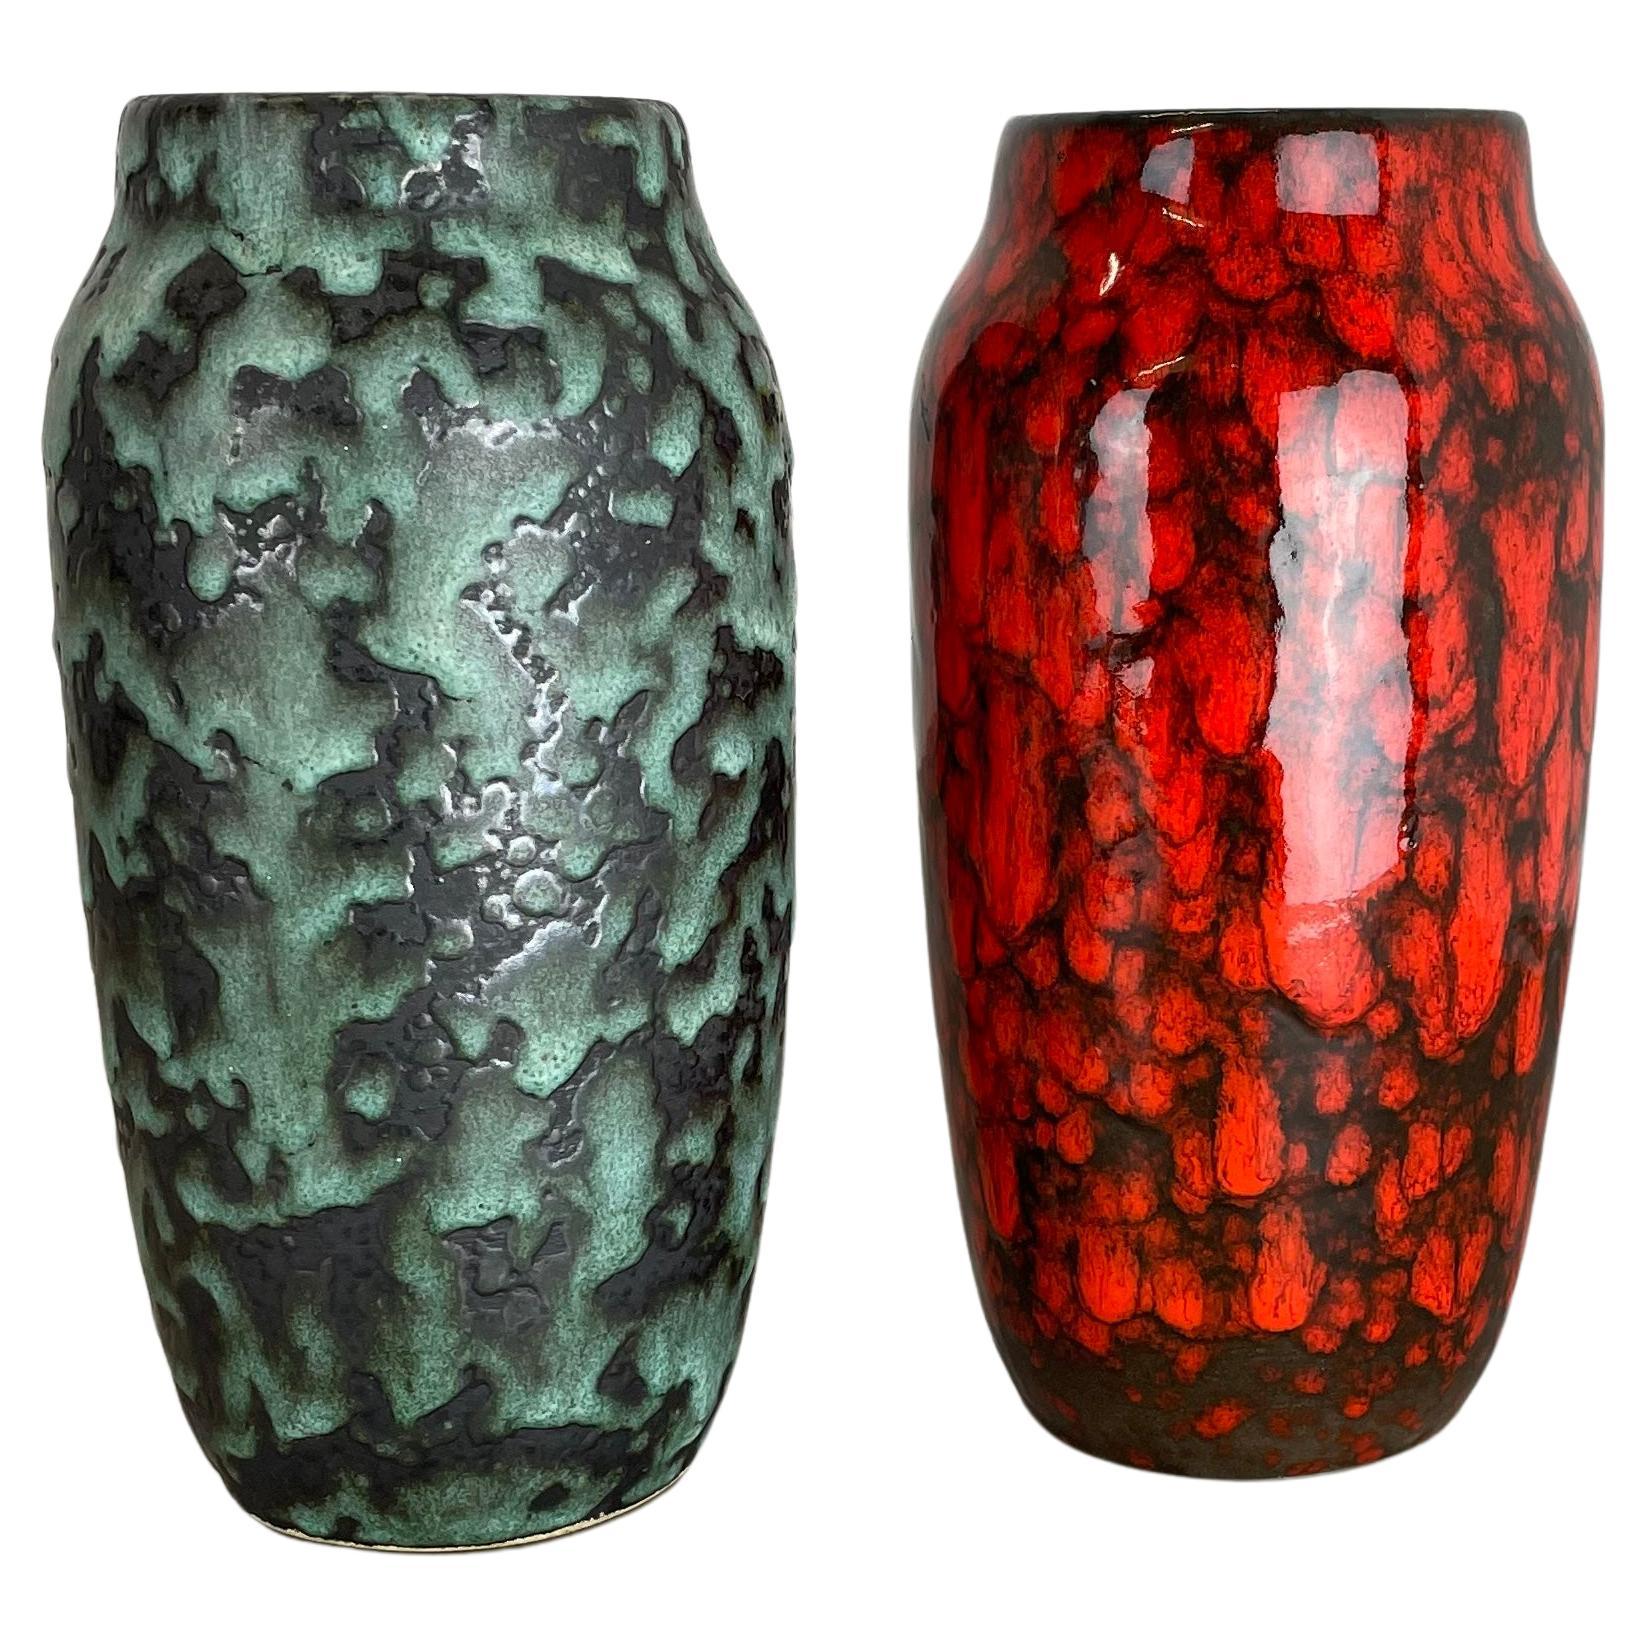 Set of 2 Rare Super Color Crusty Fat Lava Vases by Scheurich, Germany WGP, 1970s For Sale